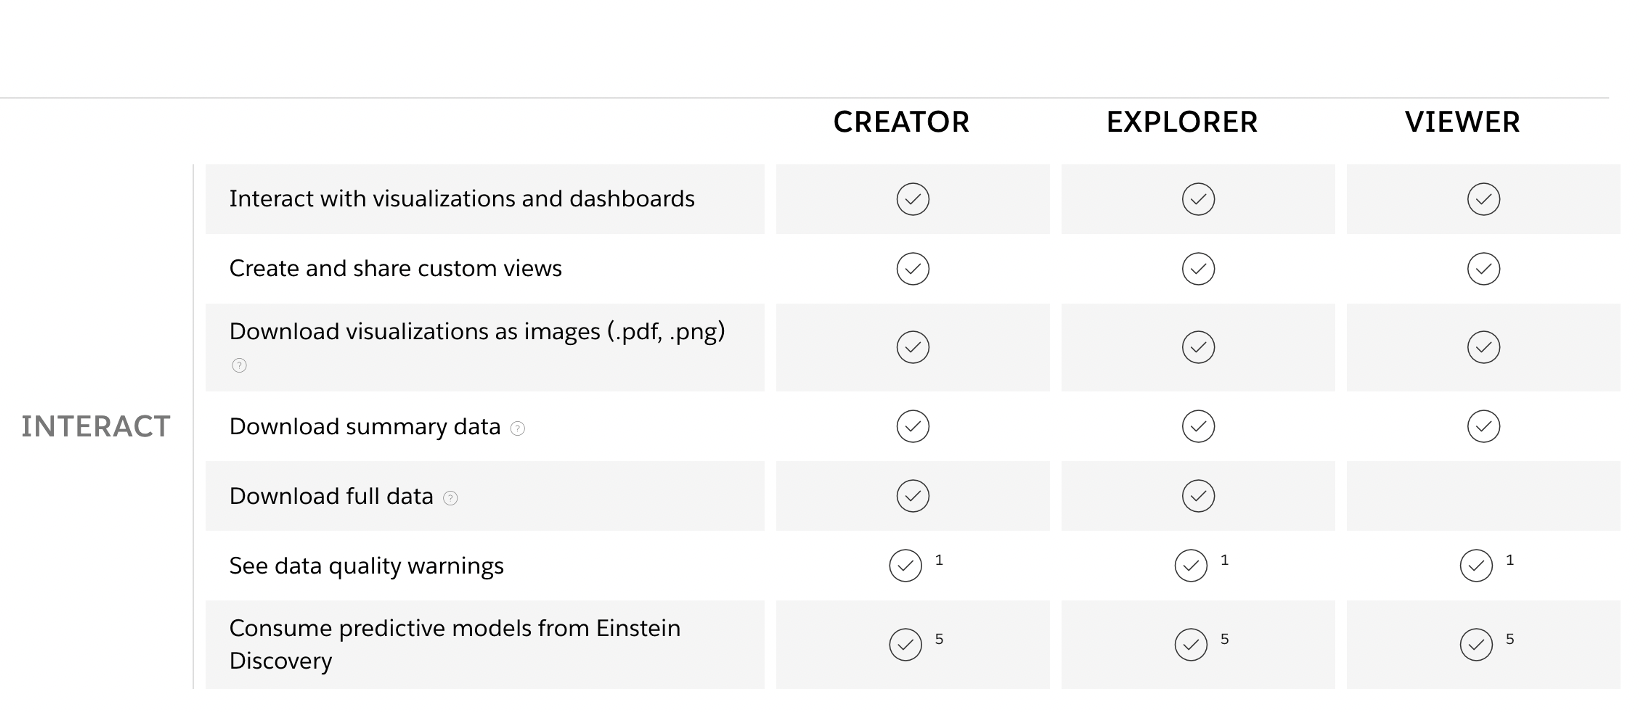 Comparison of Creator, Explorer and Viewer licences